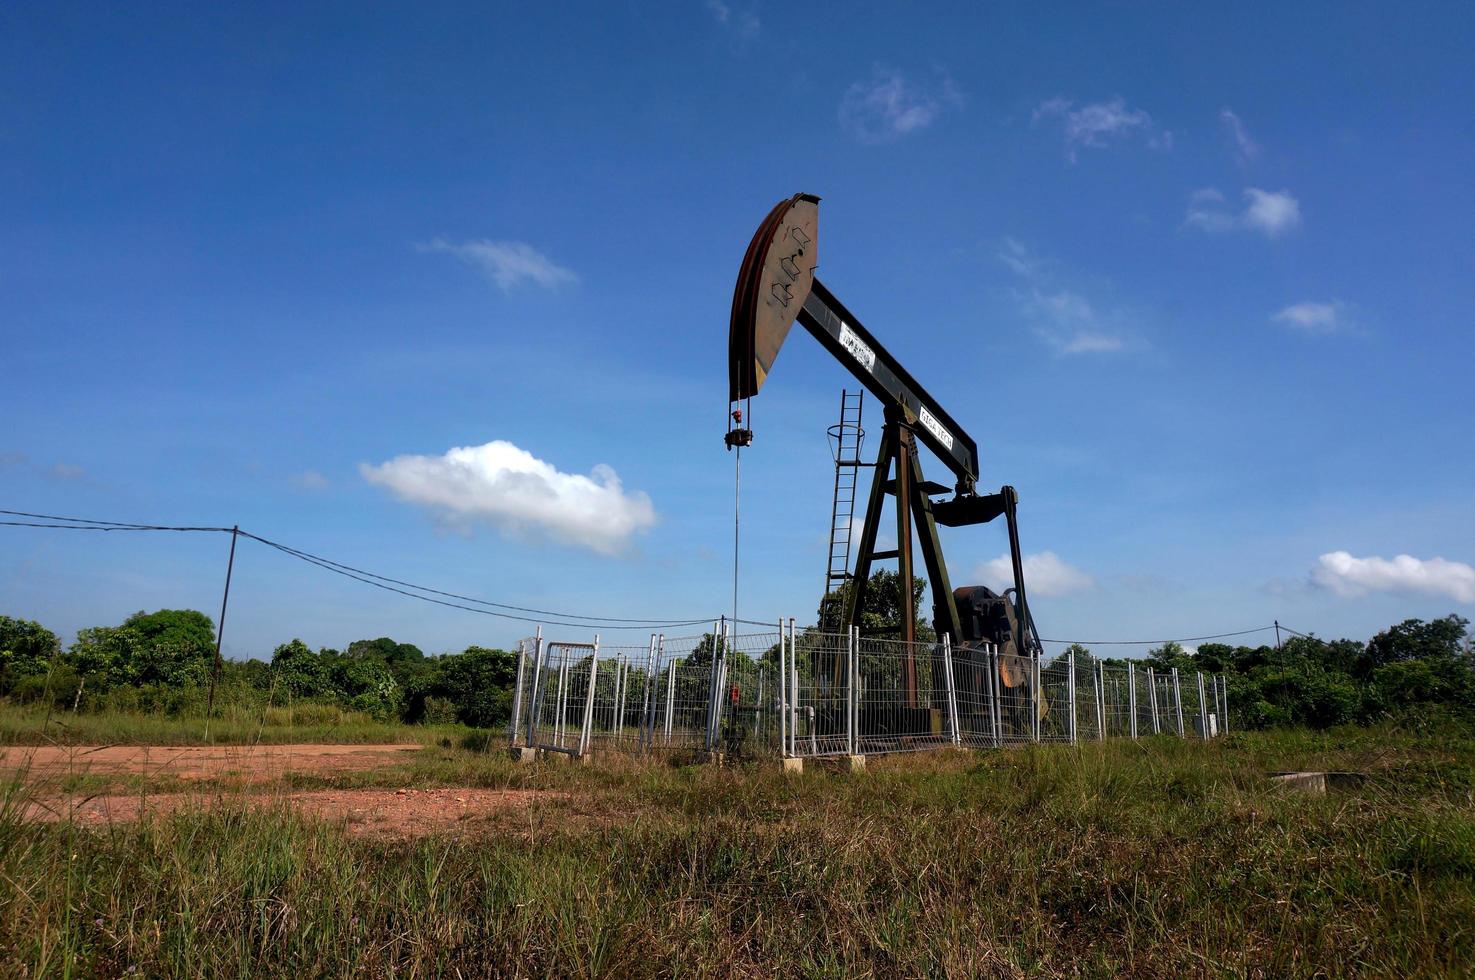 Sangatta, East Kalimantan, Indonesia, 2020 - A pumpjack is the overground drive for a reciprocating piston pump in an oil well. photo